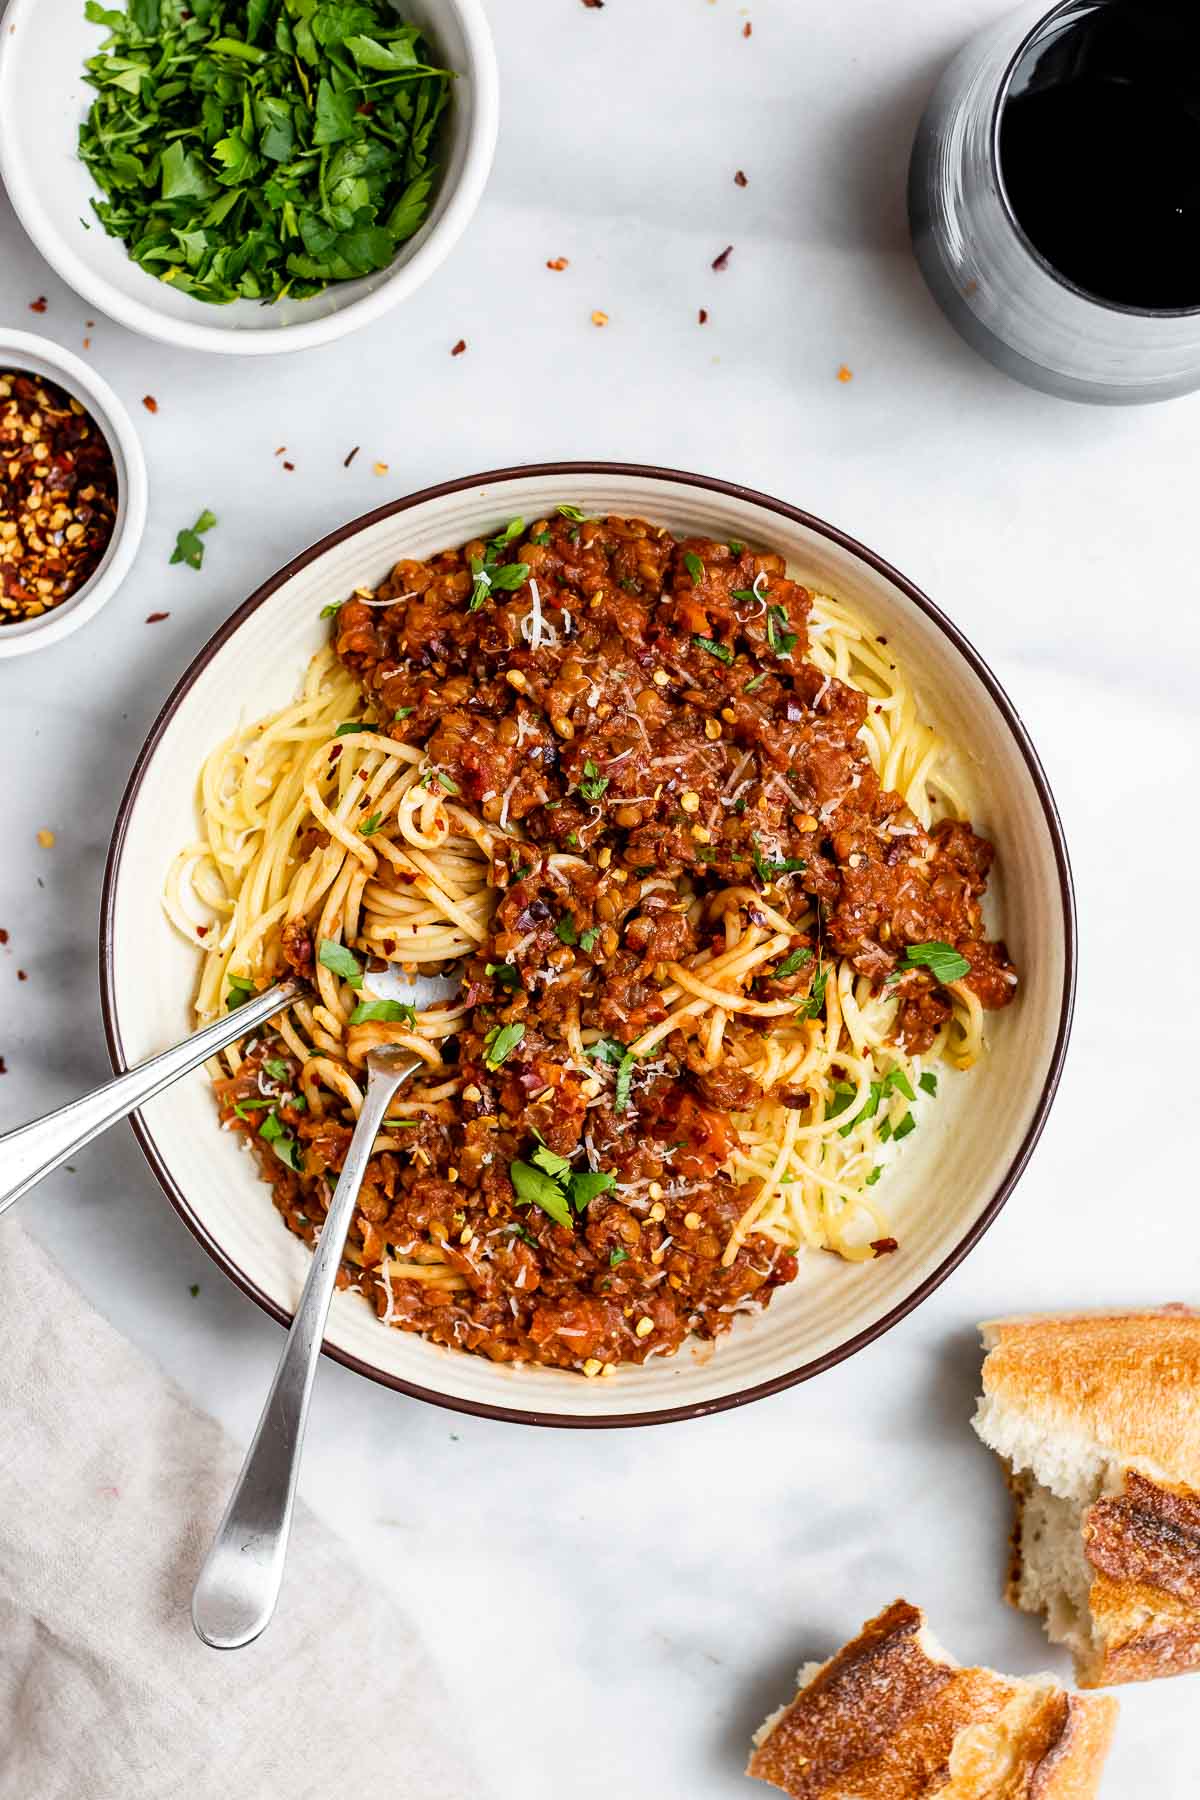 Vegan lentil bolognese in a white bowl with wine and bread on the side.